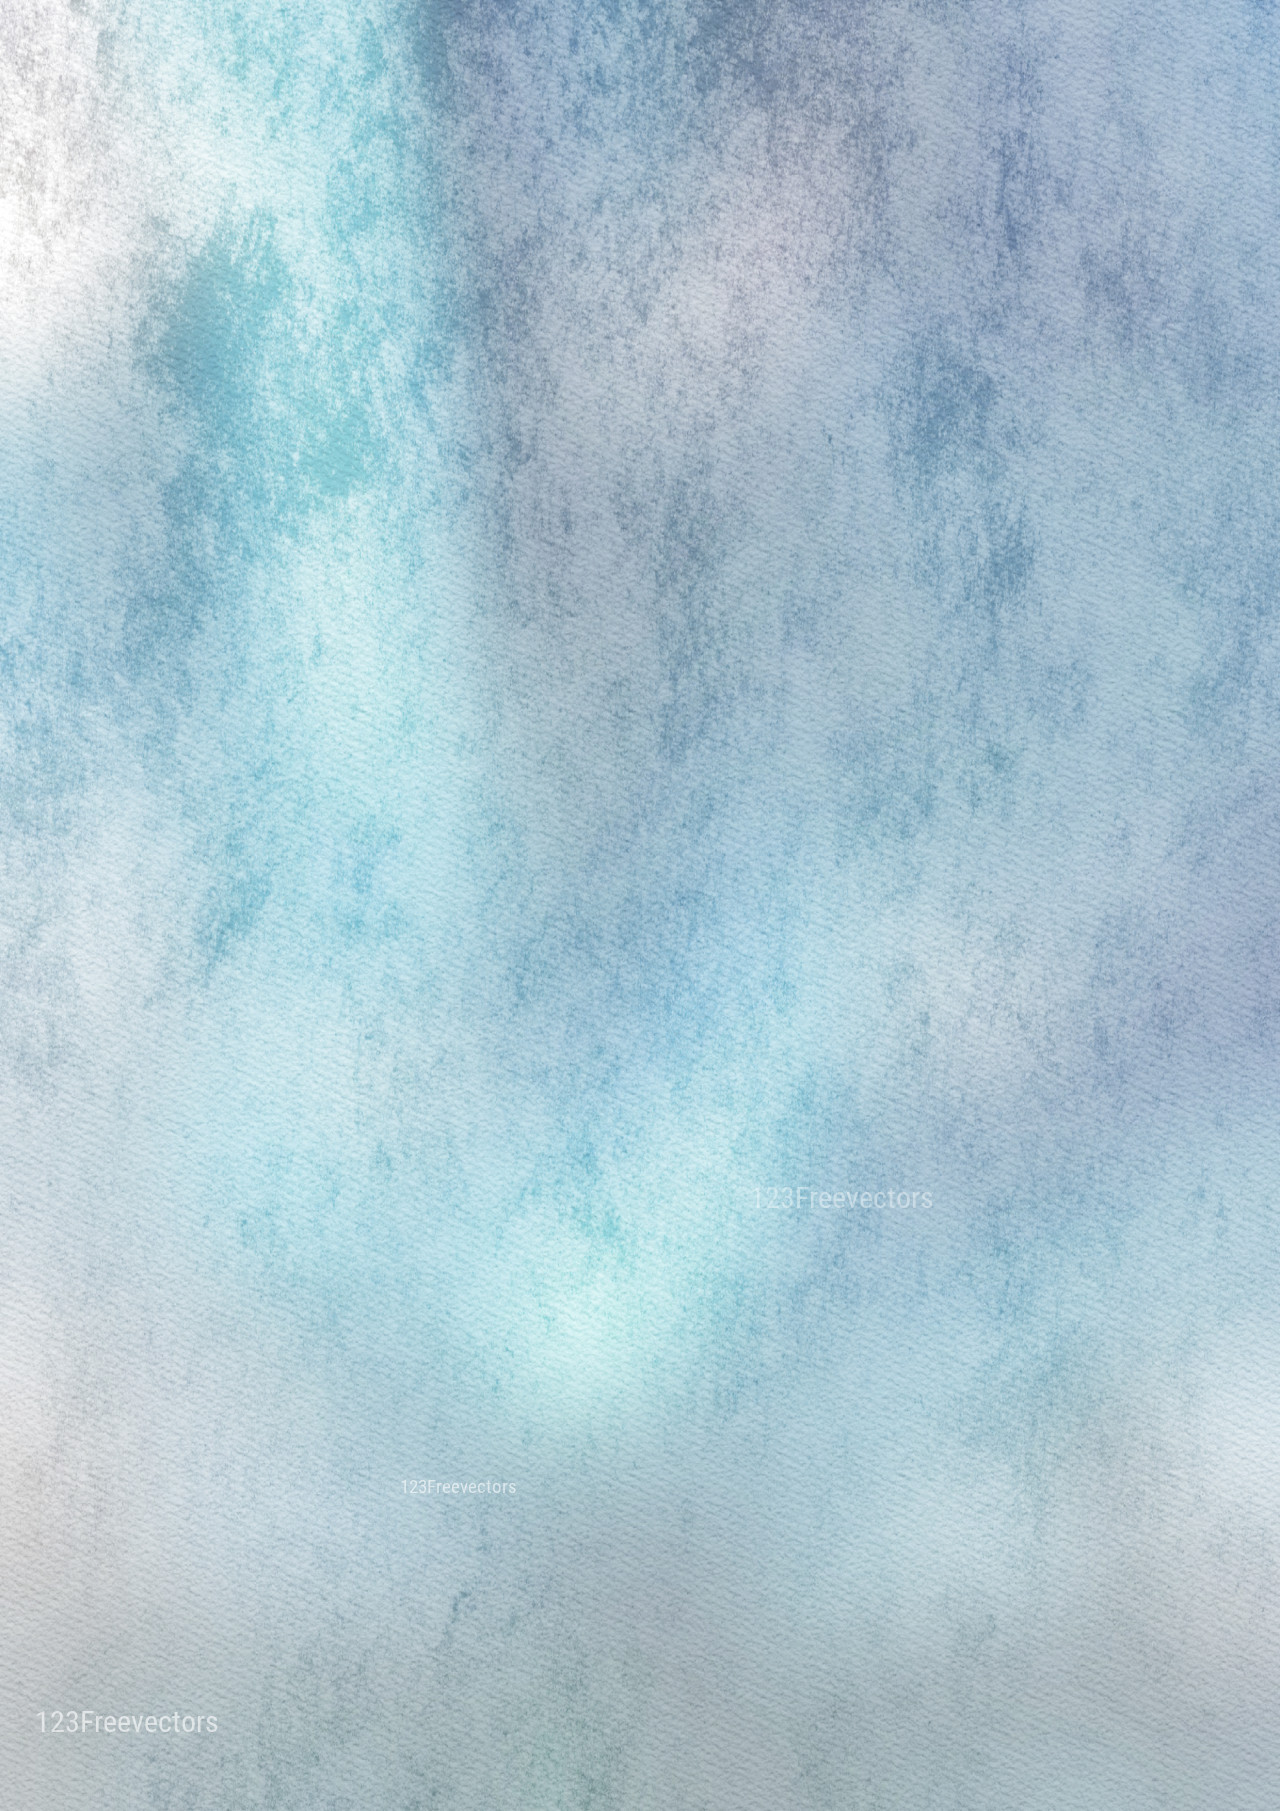 Blue and Grey Watercolor Grunge Texture Background